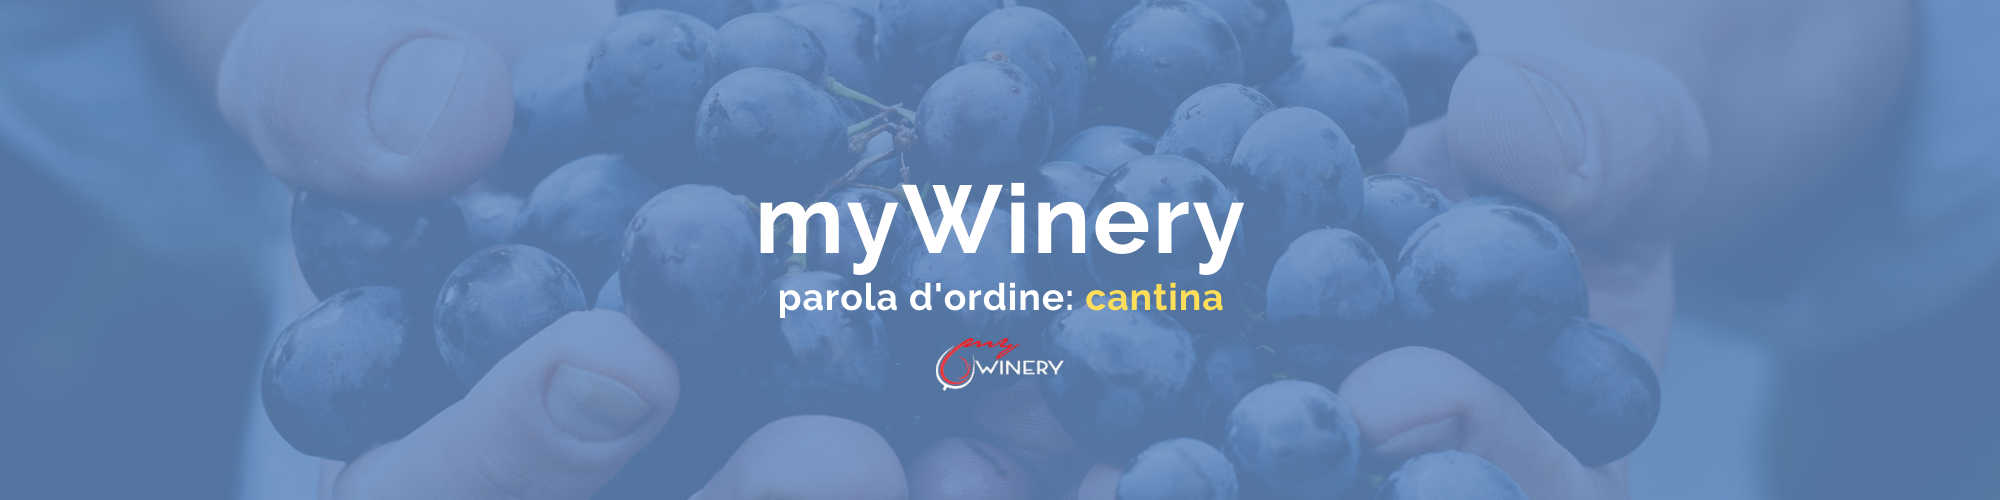 banner mywinery gestione cantina